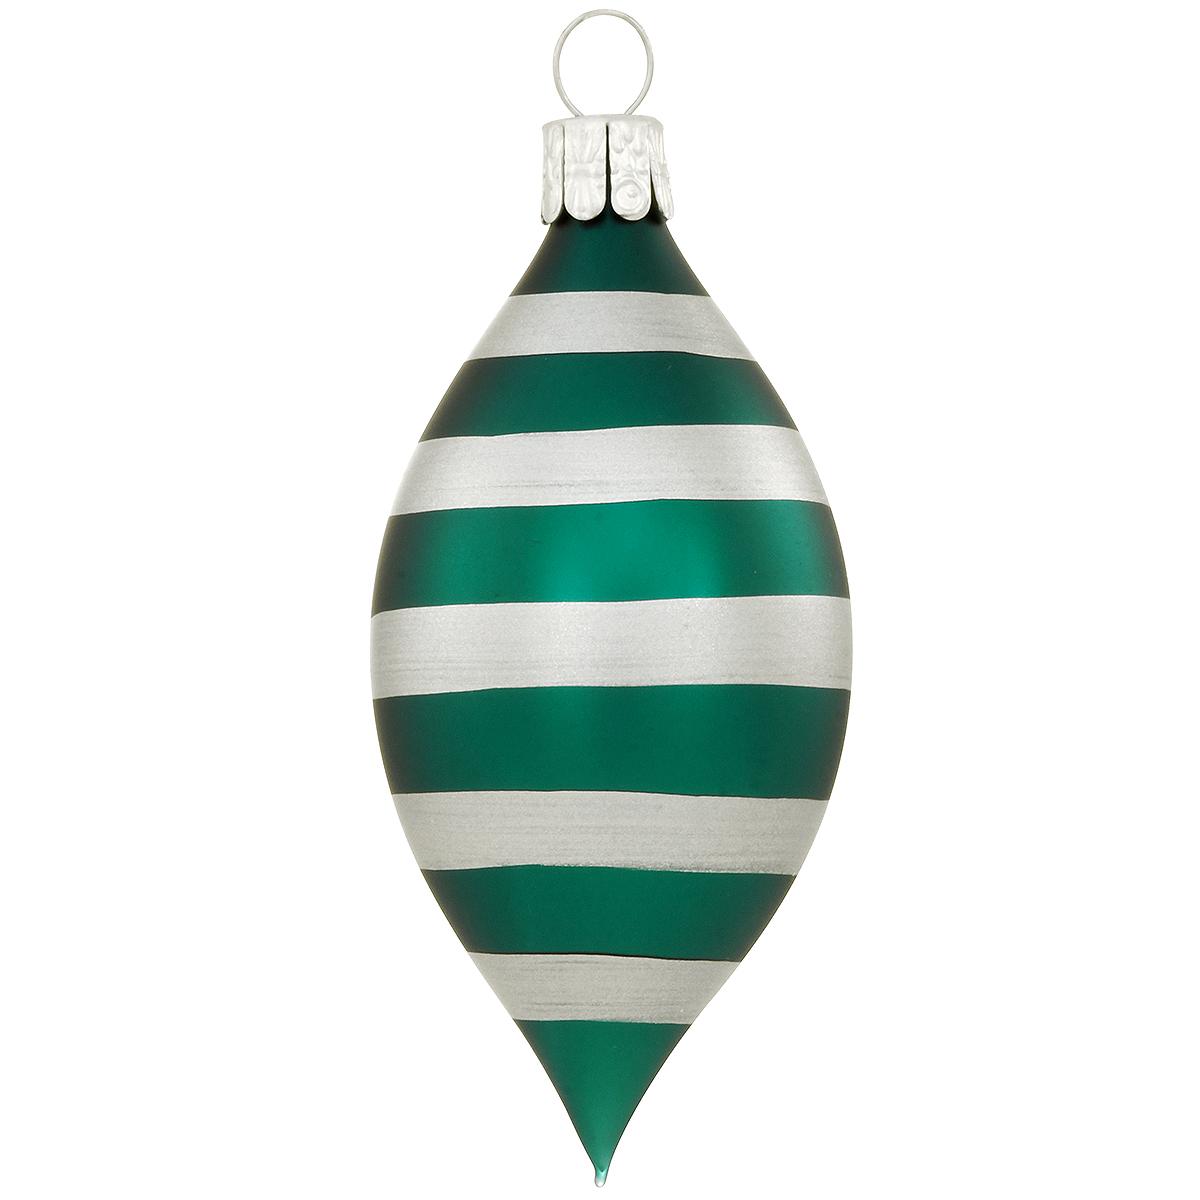 Teal With Silver Stripes Ornament